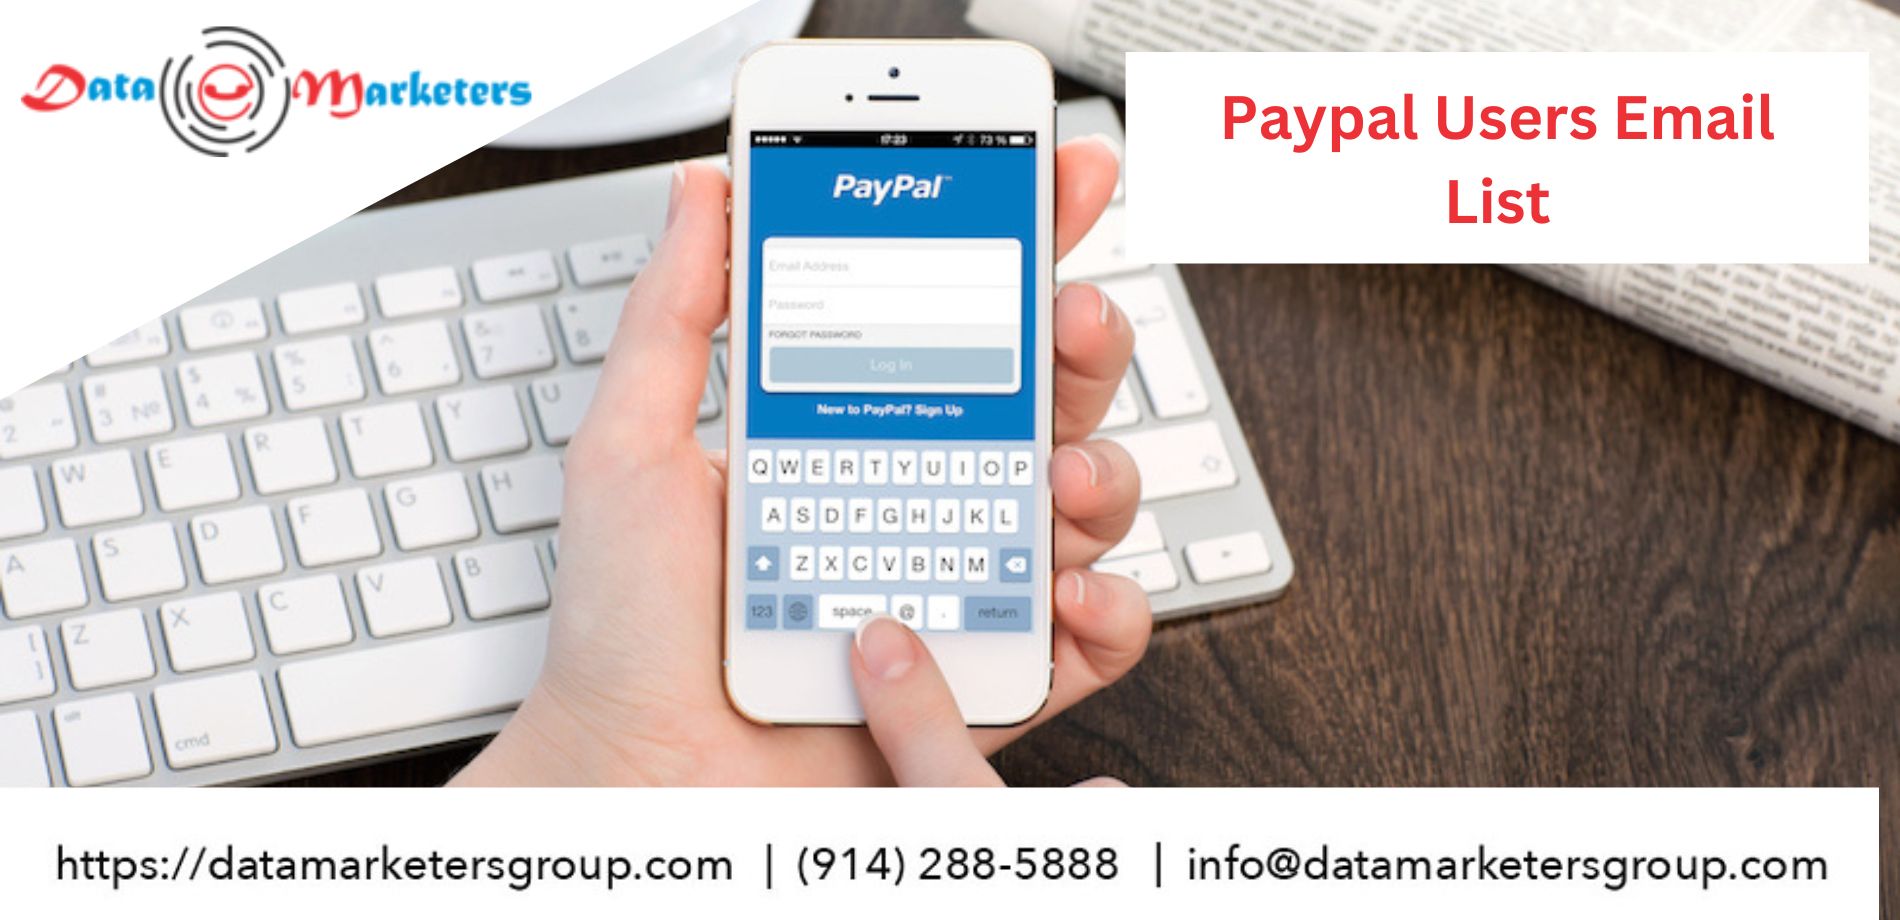 PayPal Users Email List | PayPal Email Address List | List Of Companies Using PayPal